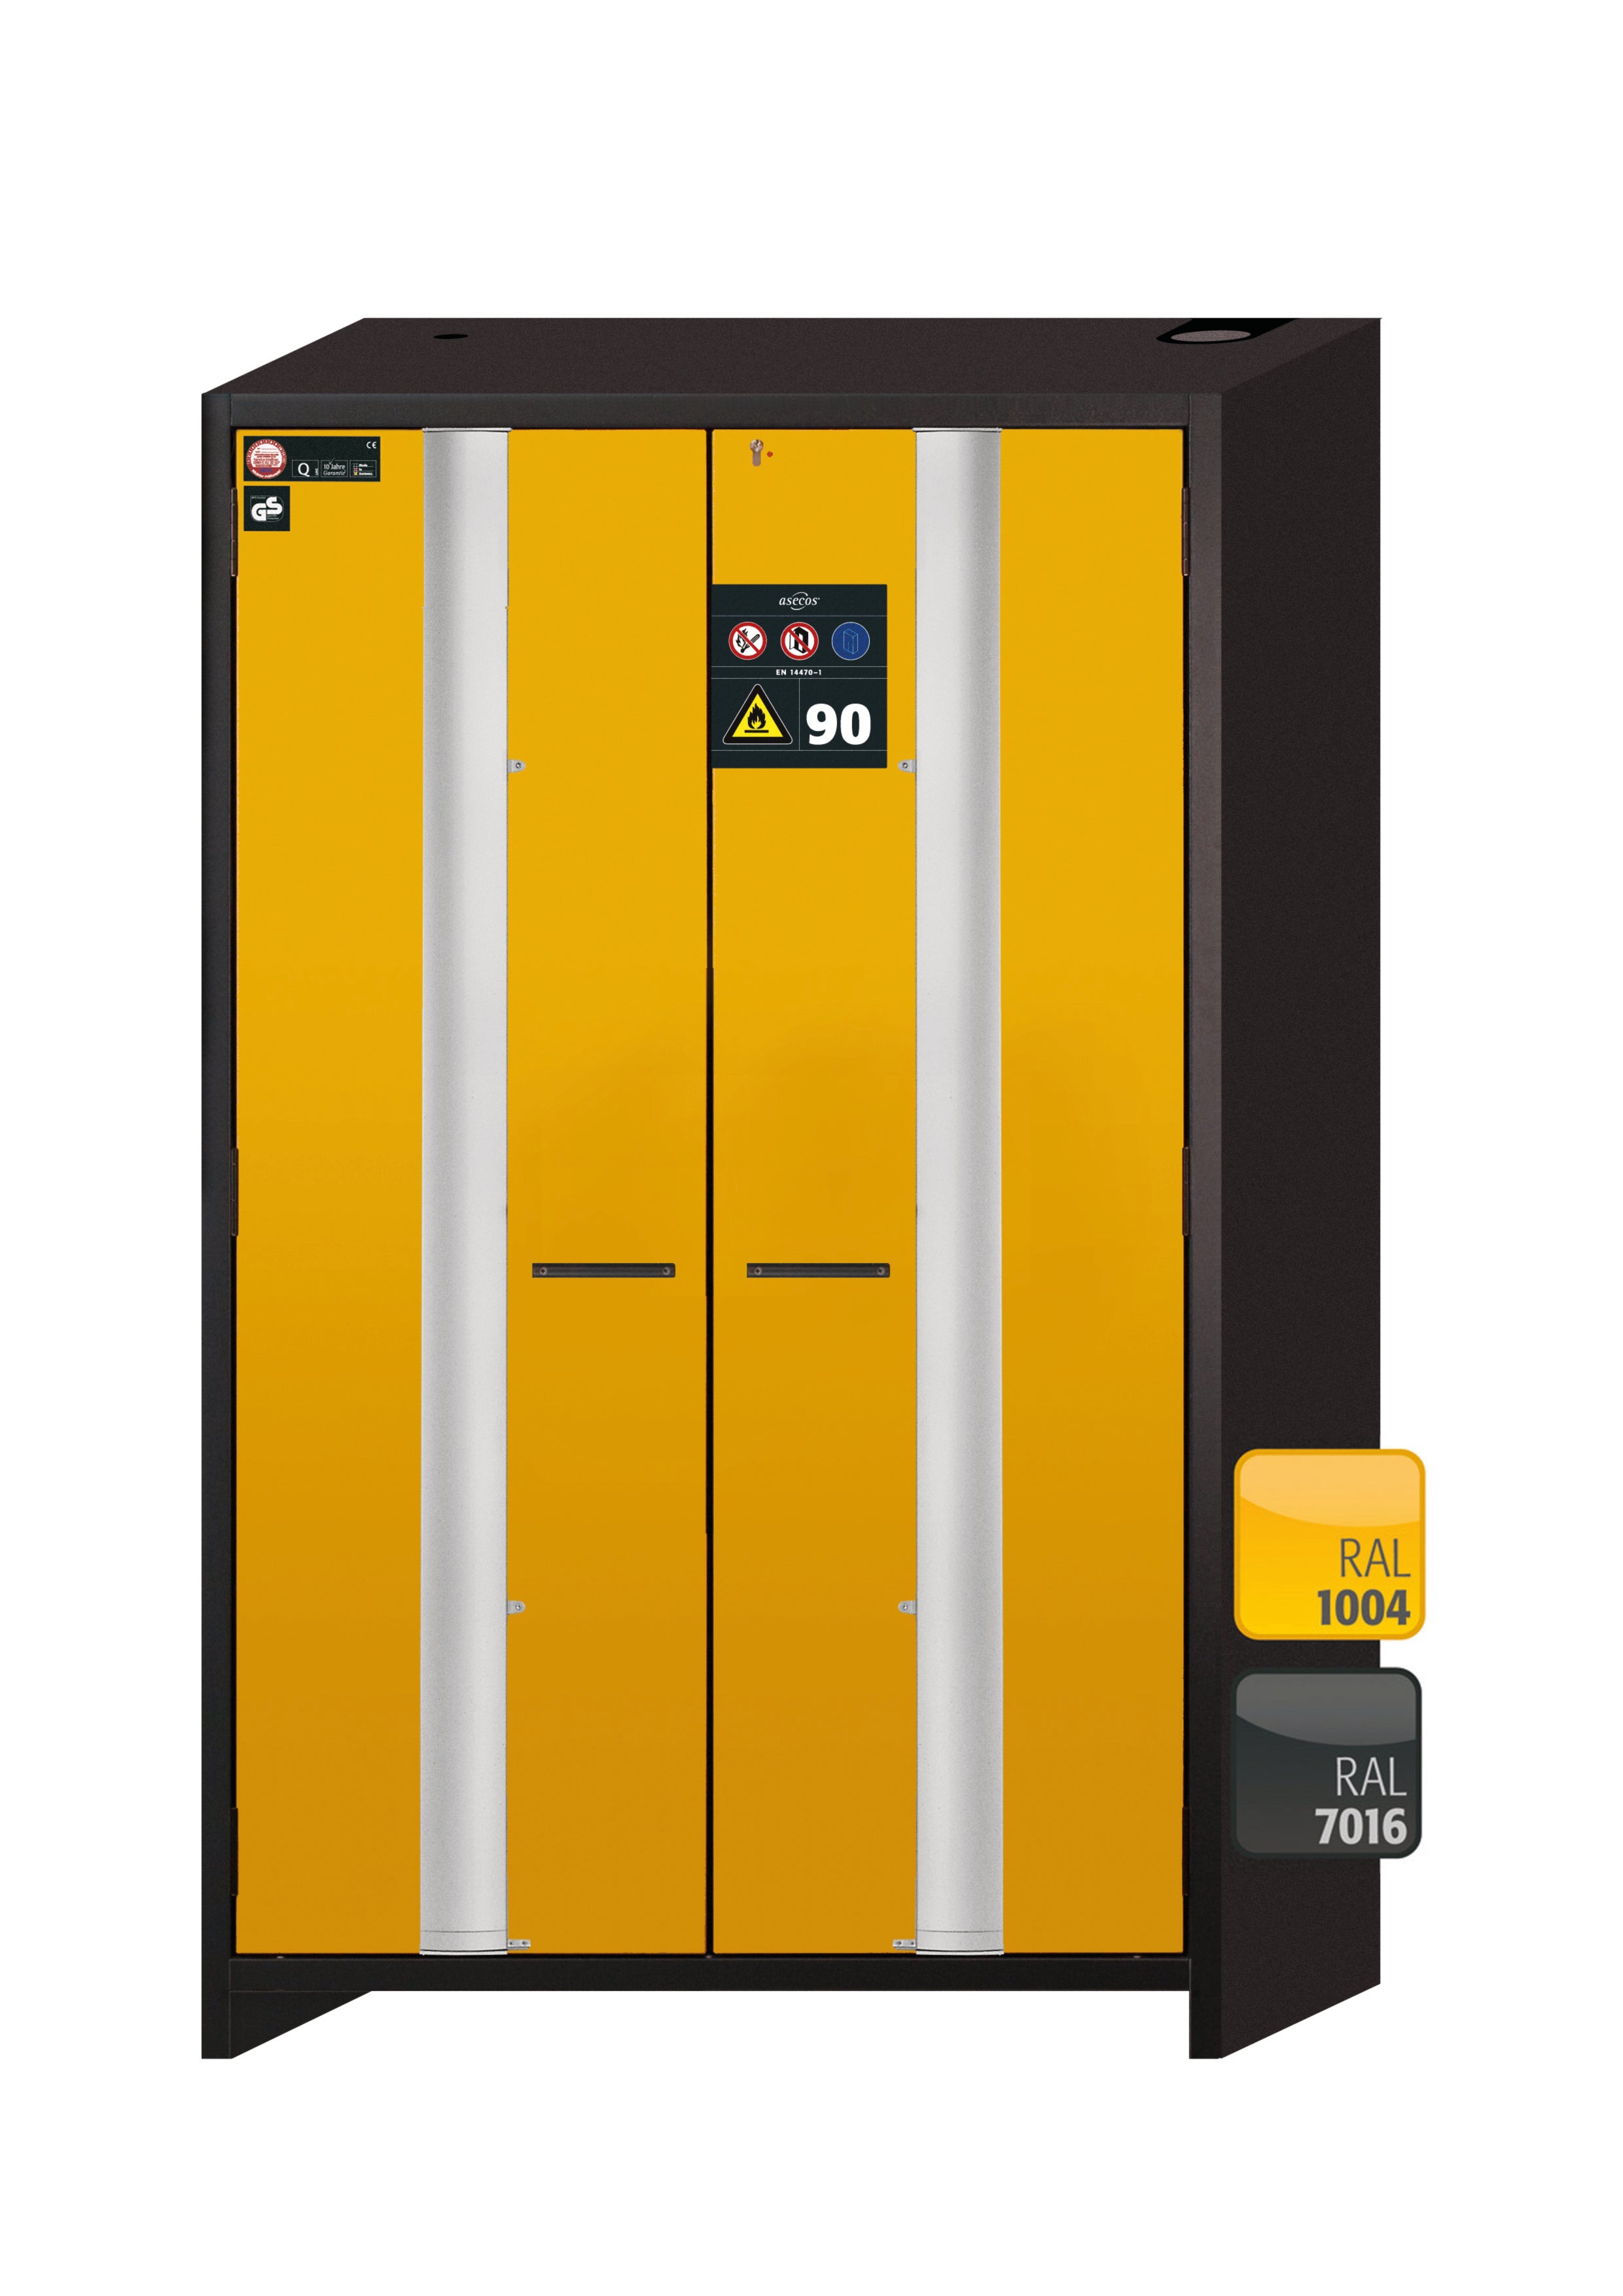 Type 90 safety cabinet Q-PHOENIX-90 model Q90.195.120.FD in safety yellow RAL 1004 with 2x standard shelves (sheet steel)